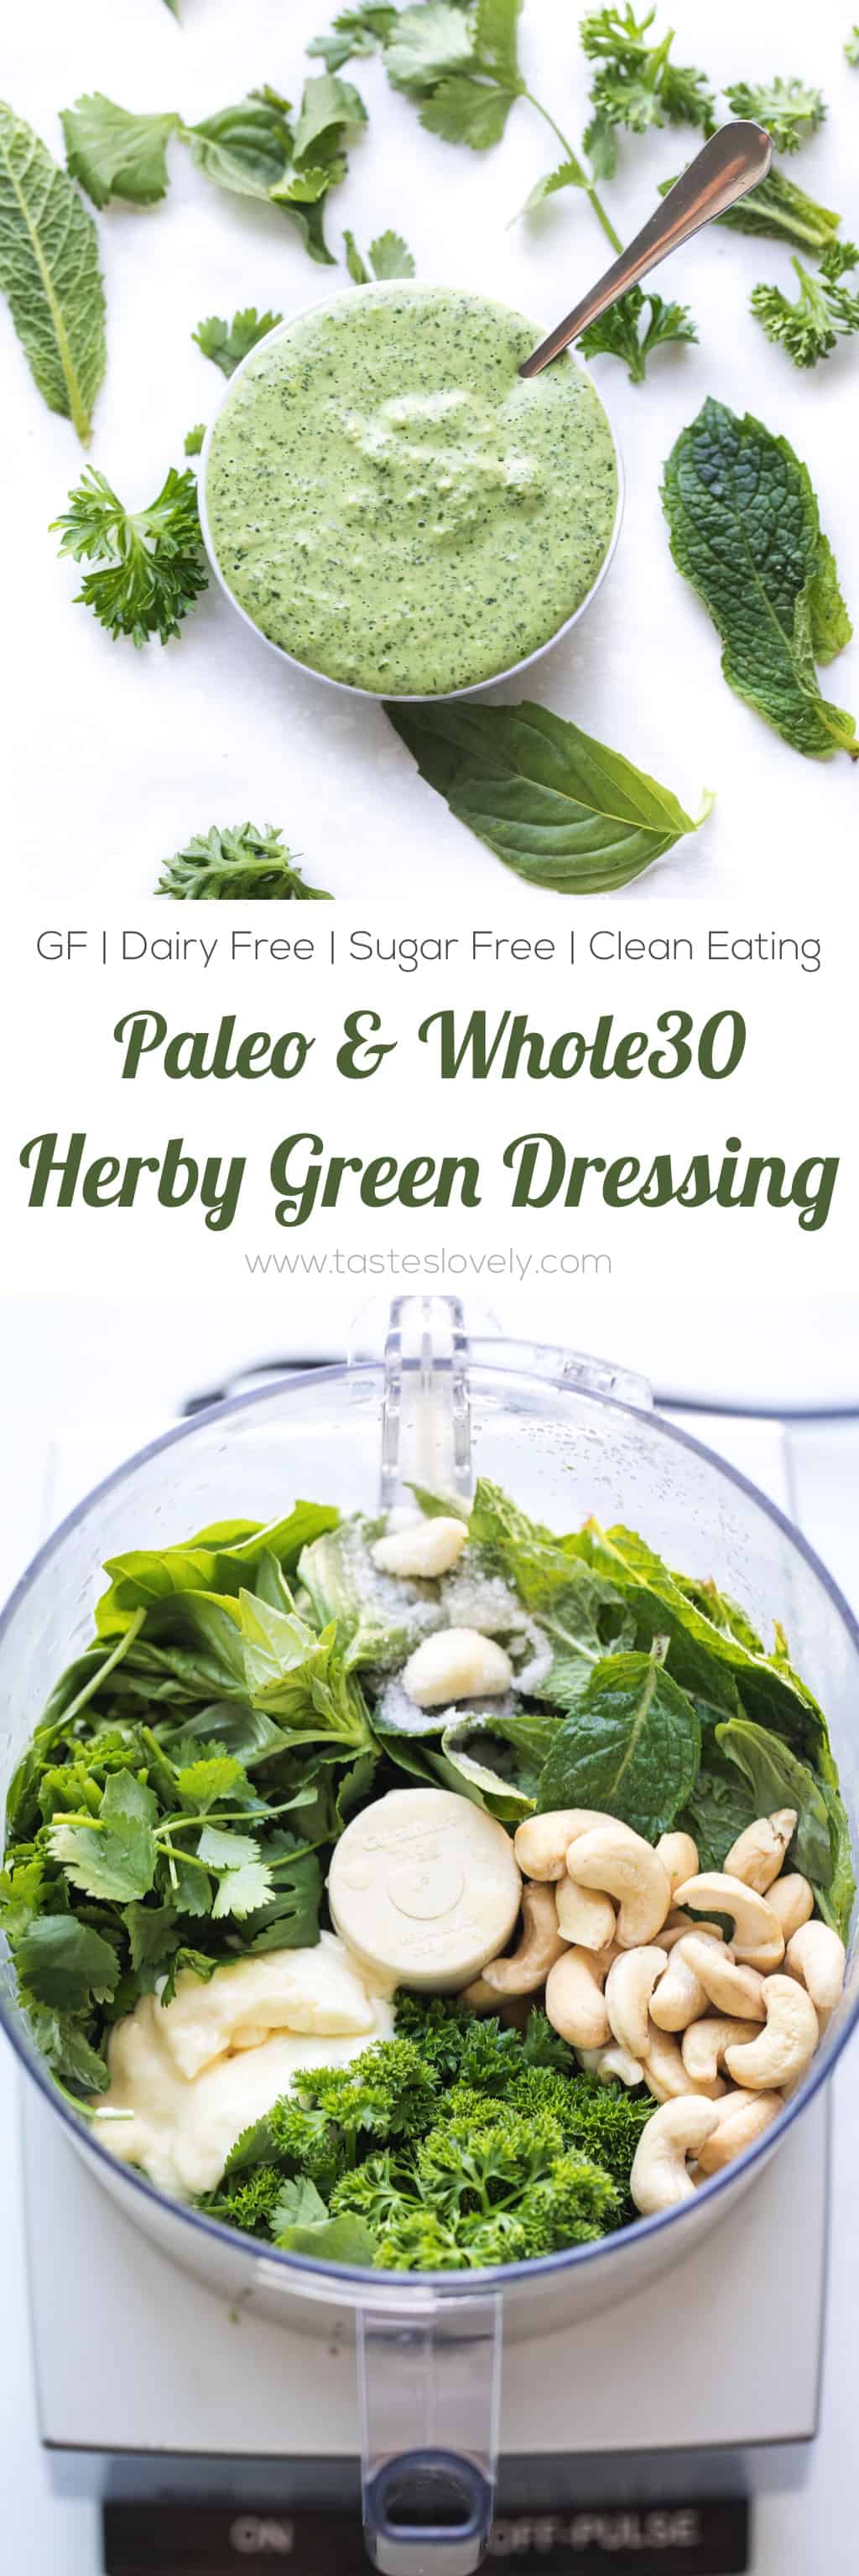 Paleo Herby Green Dressing - a light and refreshing dressing made with parsley, mint, basil and cilantro. Delicious on salads, meat and vegetables! Gluten free, dairy free, sugar free, clean eating.-1.CR2